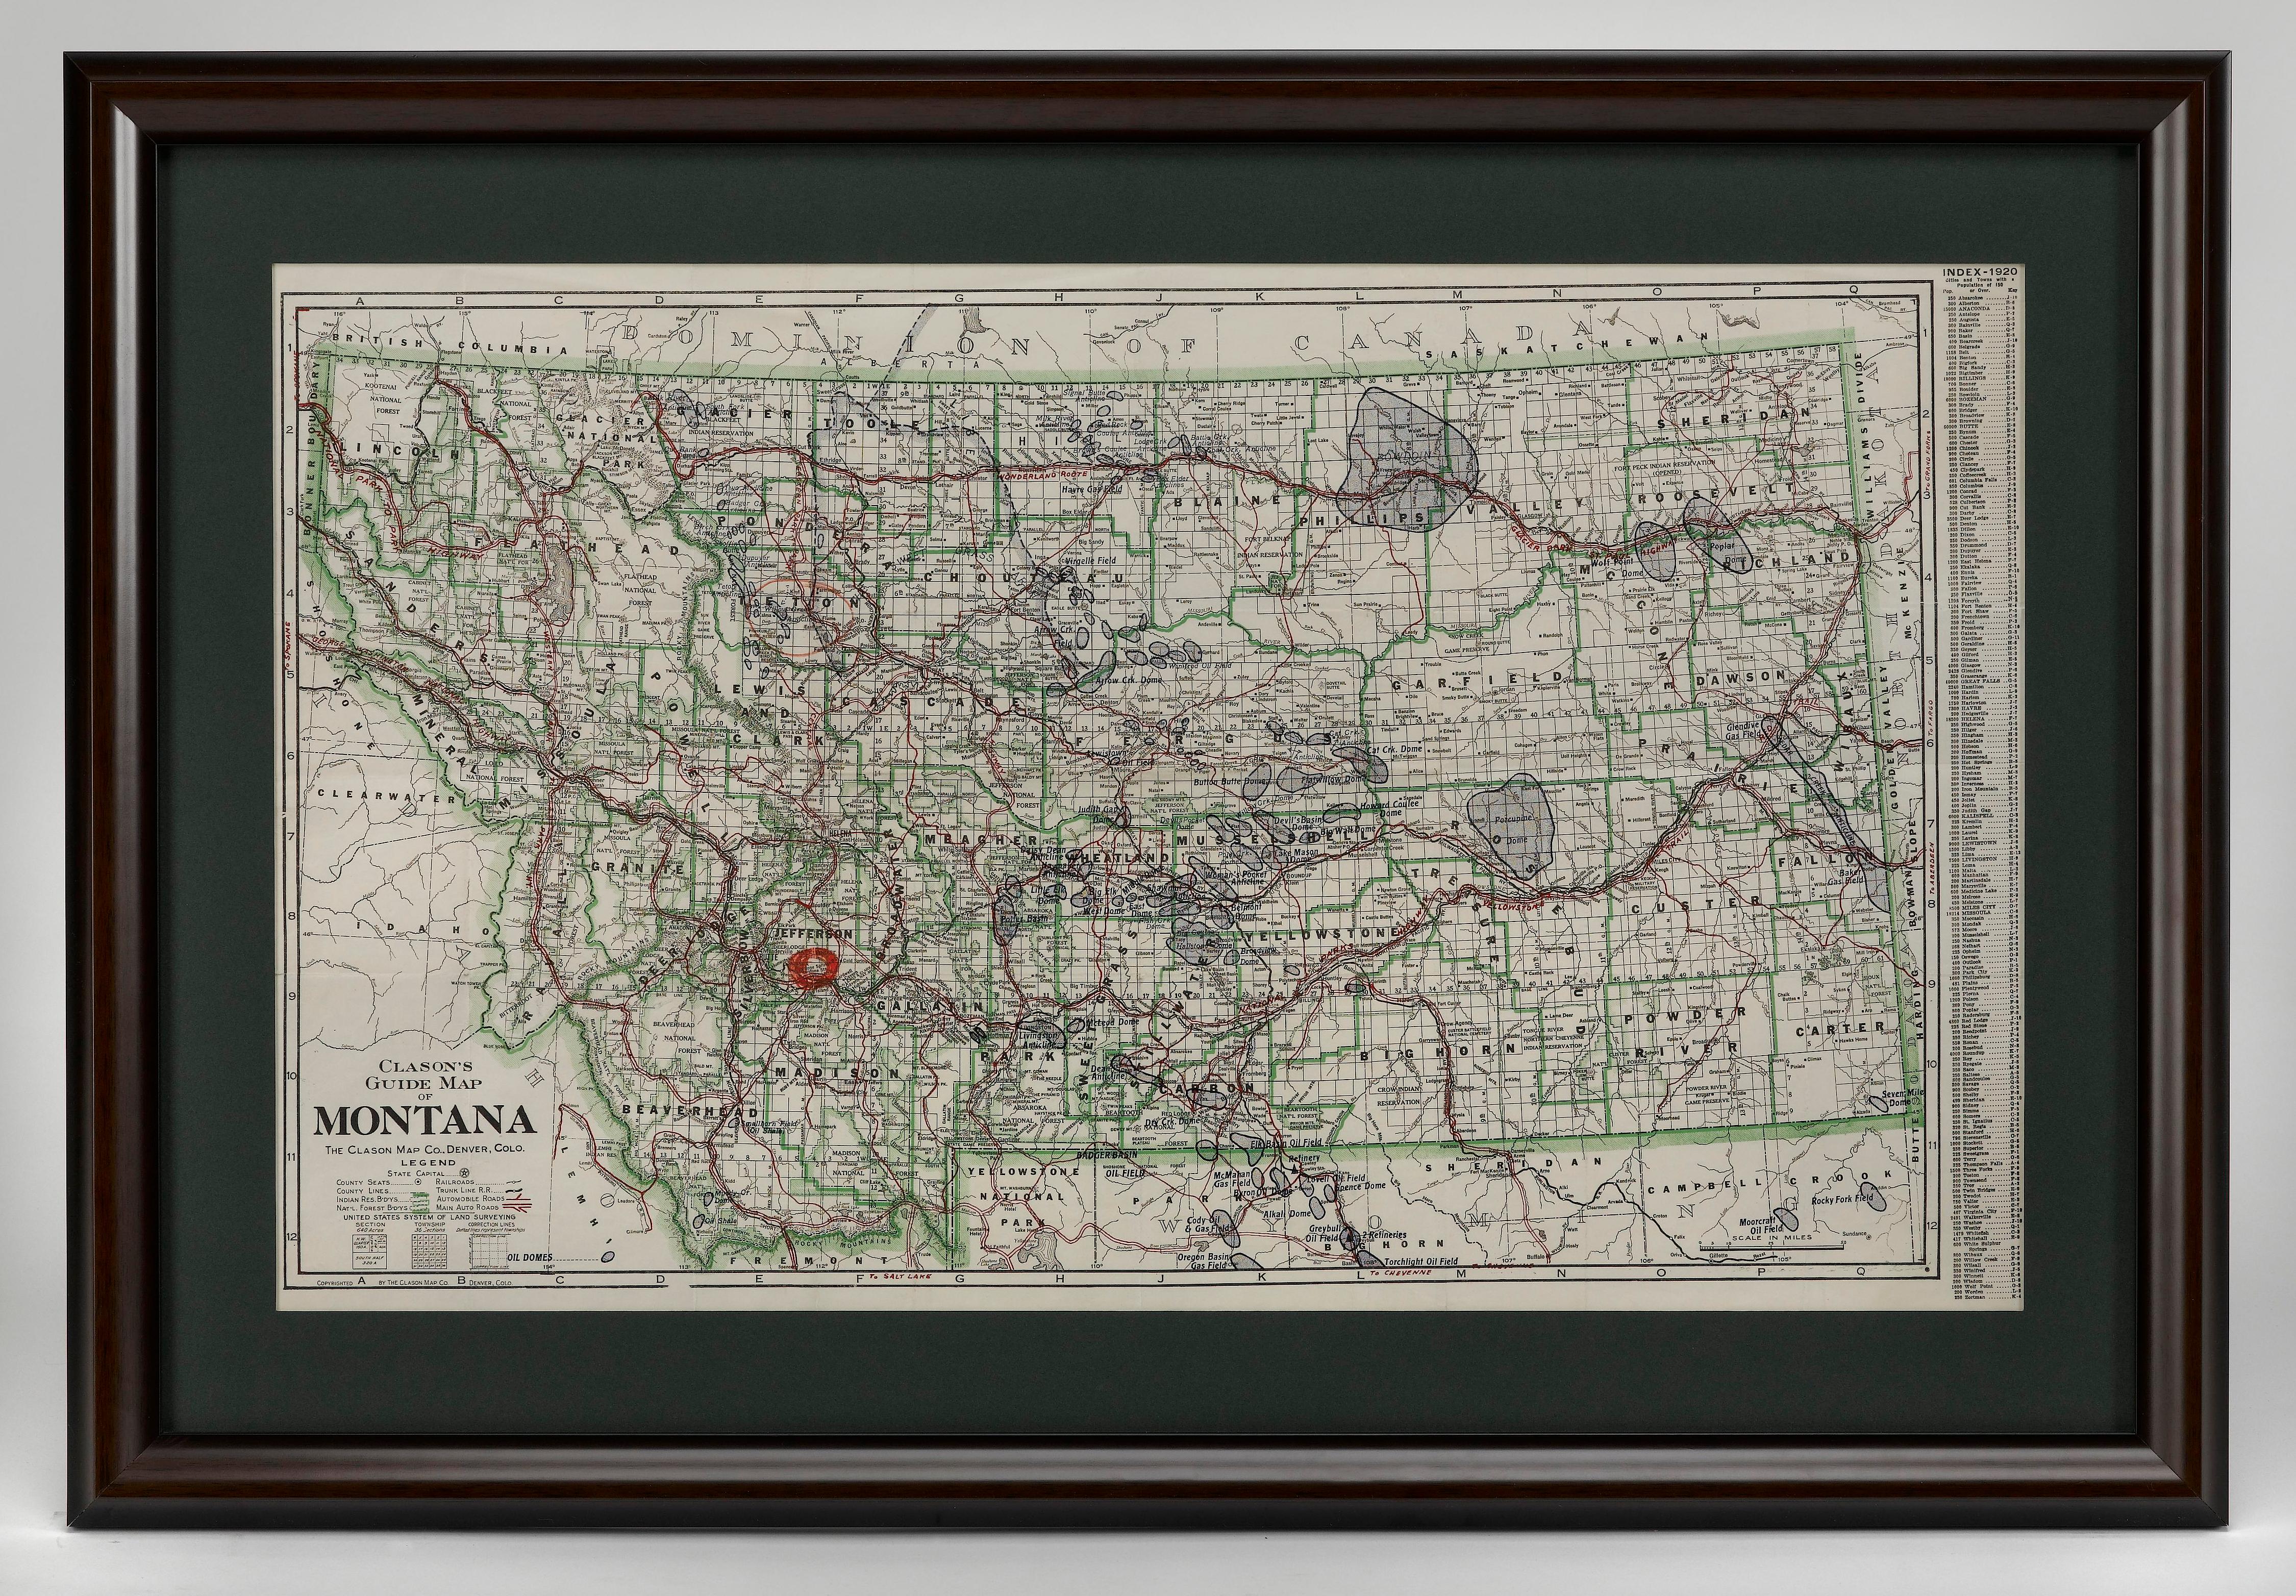 Presented is “Clason's Guide Map of Montana,” published in the early 1920s by the Clason Map Company. Issued as a folding map, this map identifies county boundaries, county seats, Native American reservation borders, national forest boundaries,